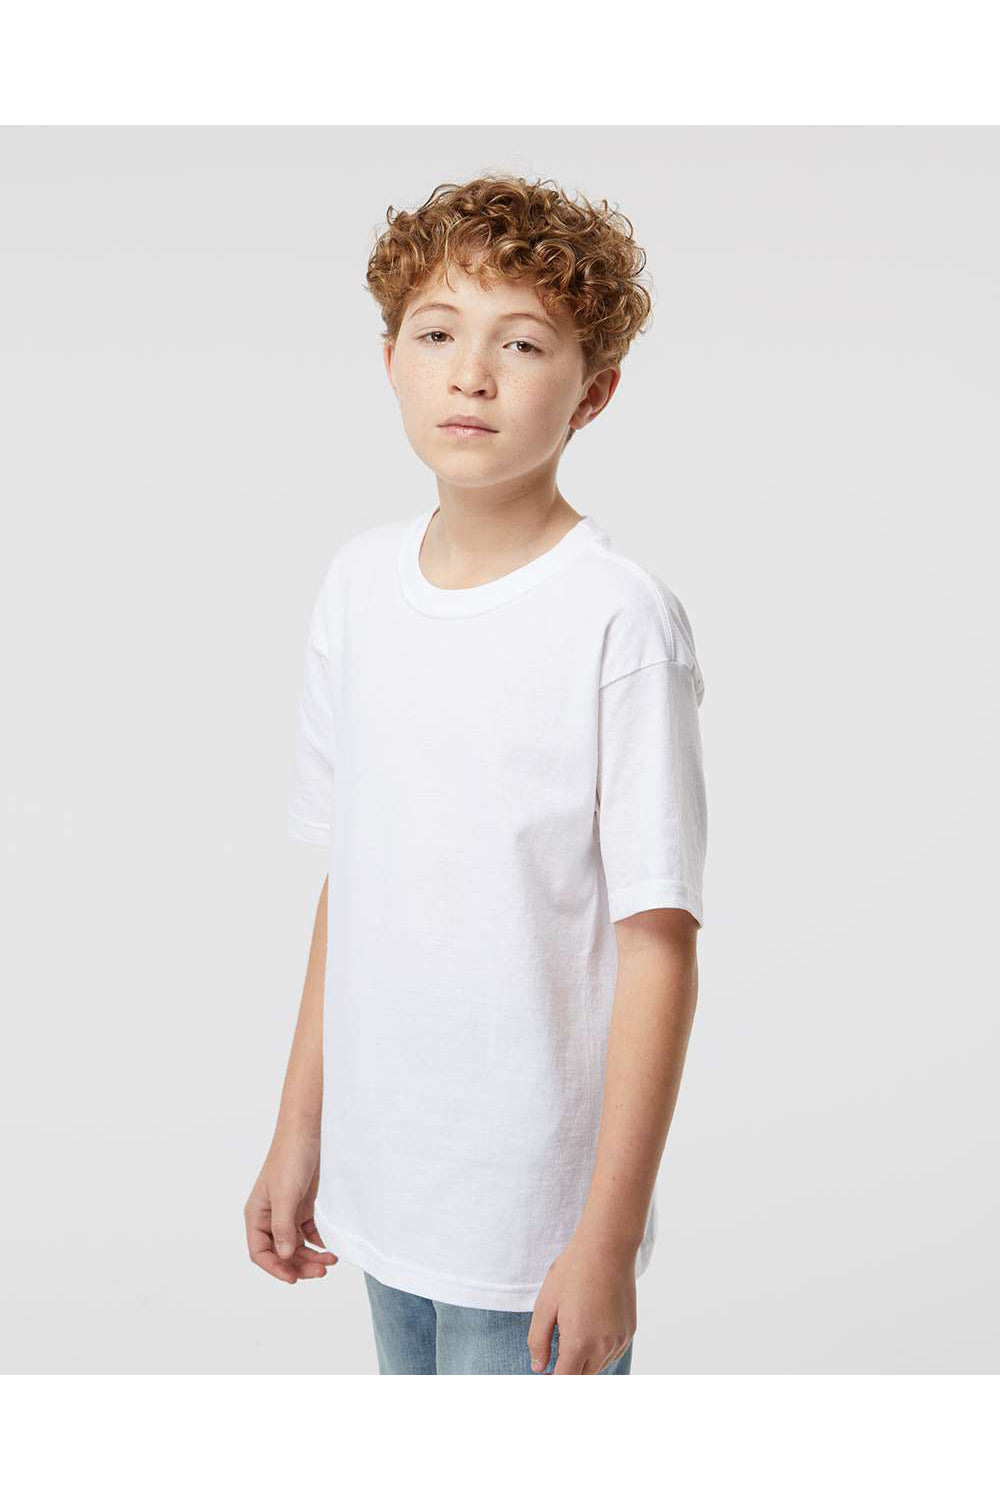 M&O 4850 Youth Gold Soft Touch Short Sleeve Crewneck T-Shirt White Model Side